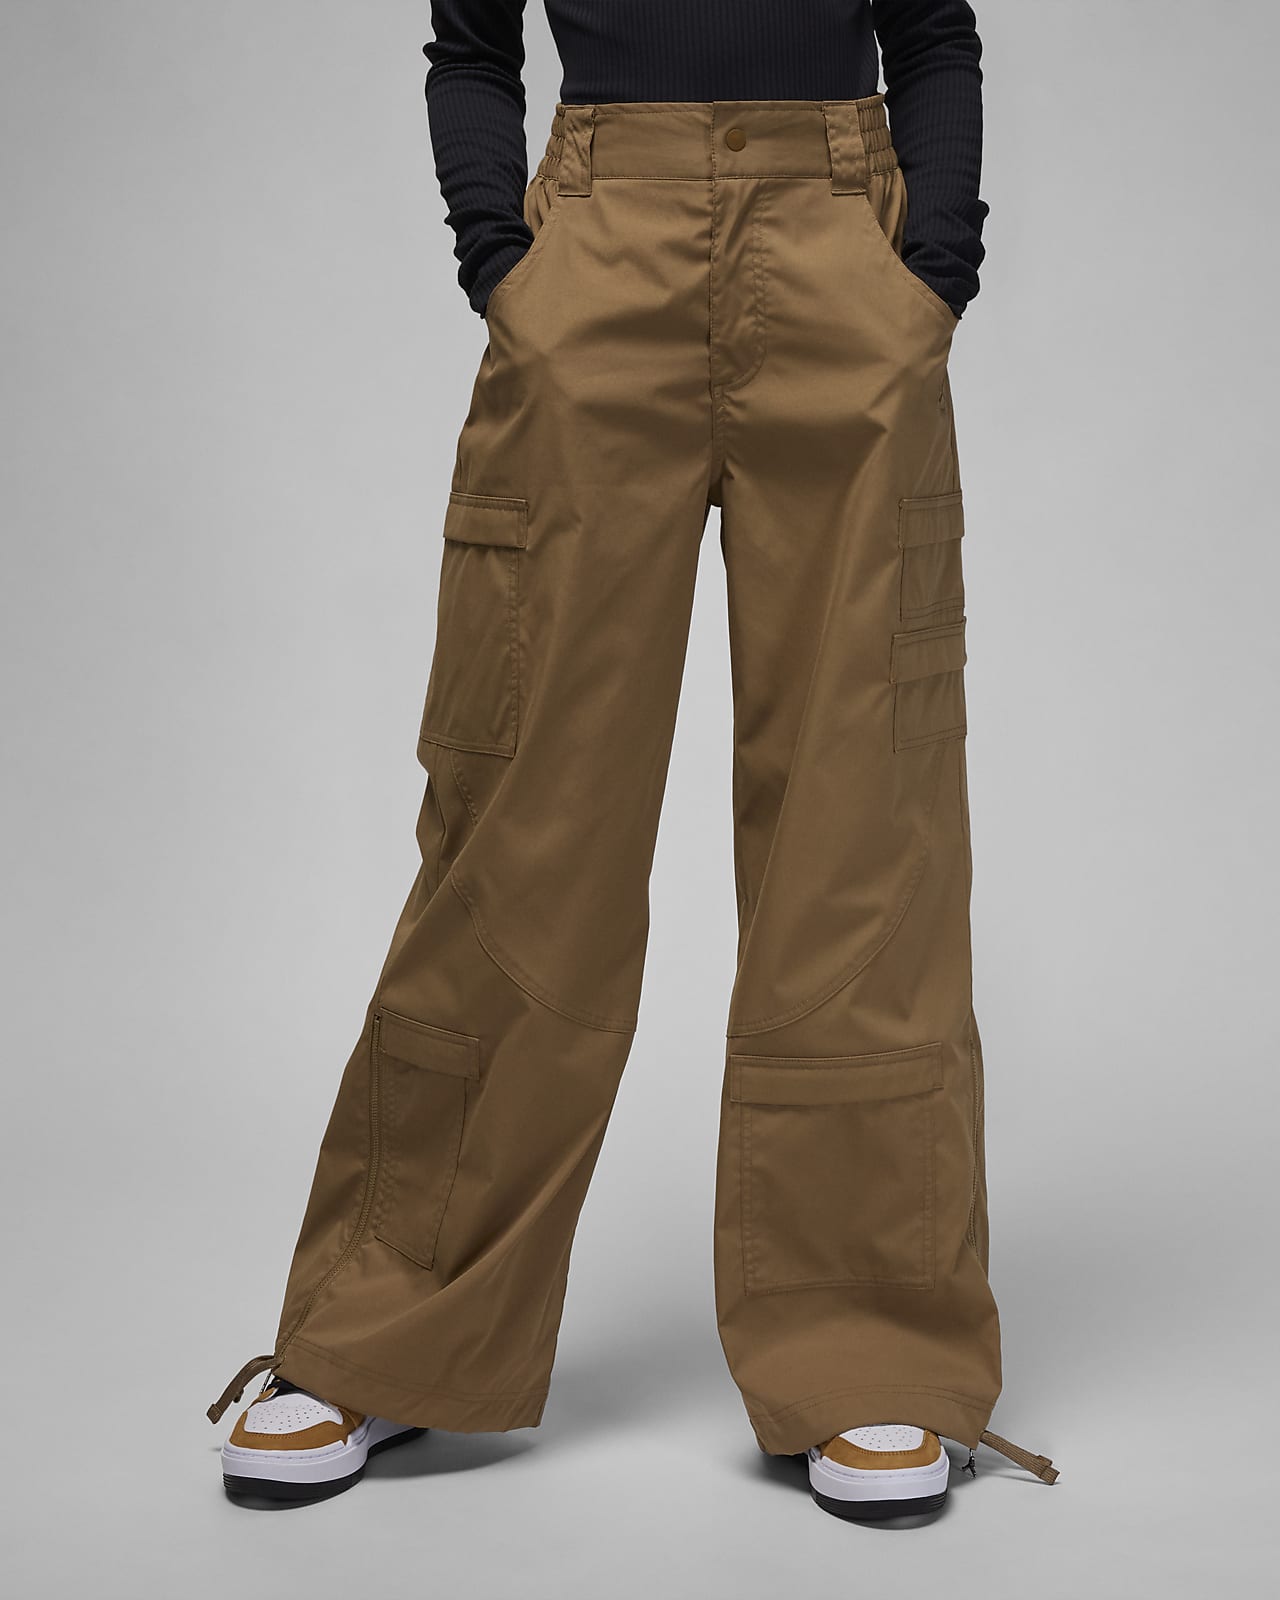 Ladies Brown Trousers  Also in Plus Sizes  JD Williams